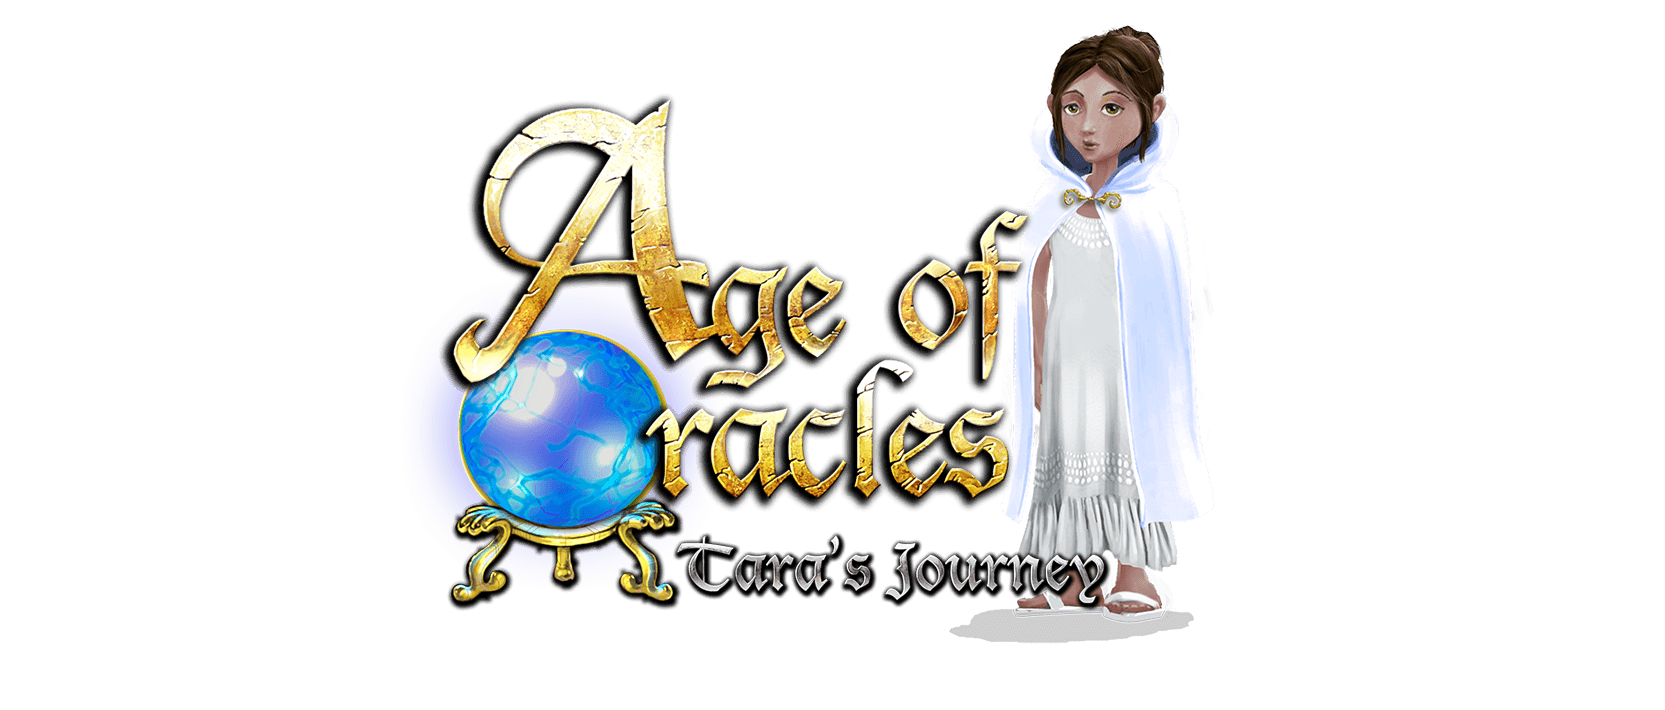 Age of Oracles